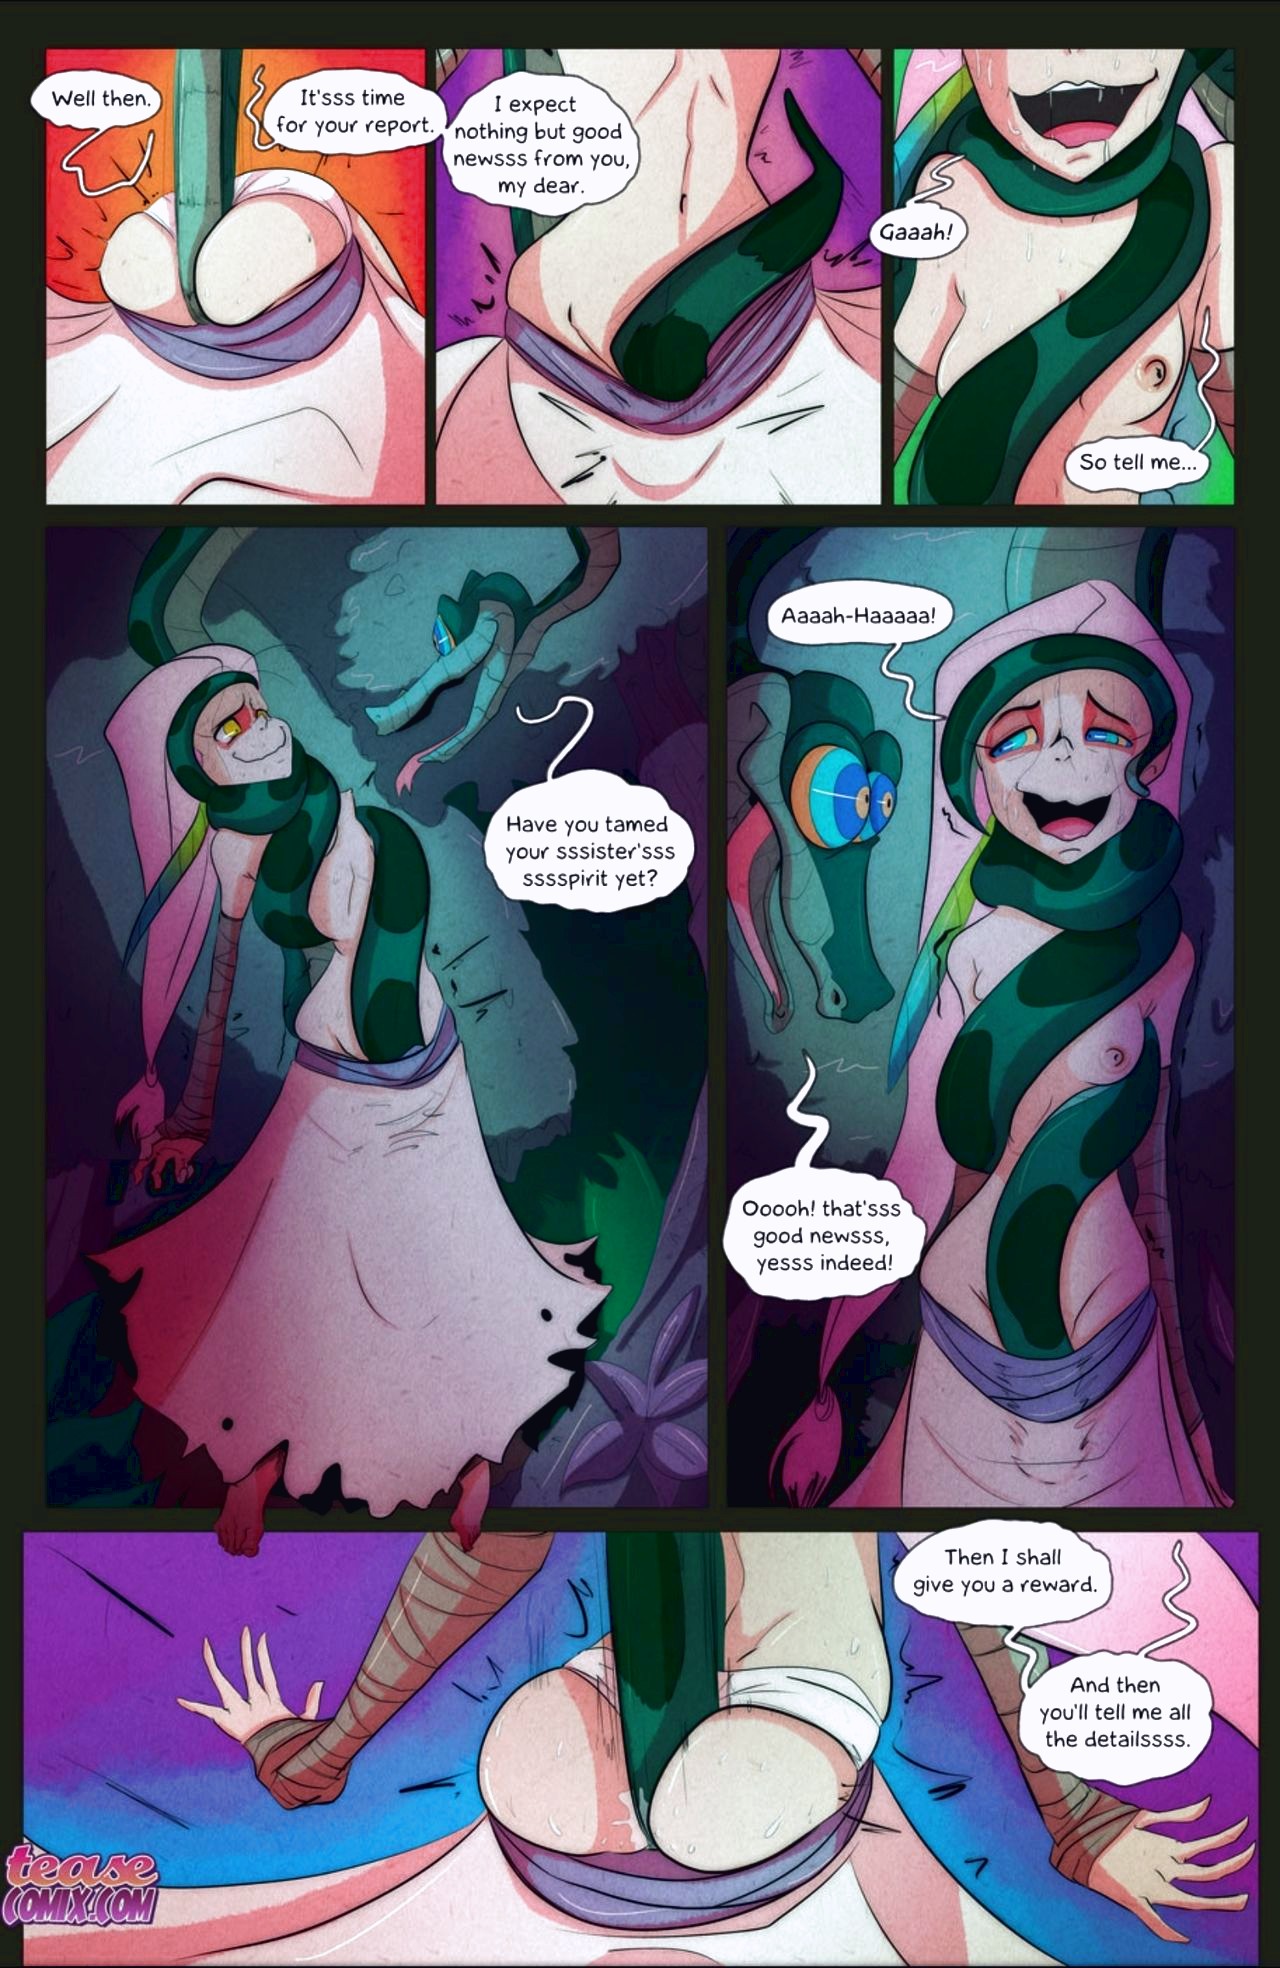 The Snake and The Girl 4 porn comic - the best cartoon porn comics, Rule 34  | MULT34